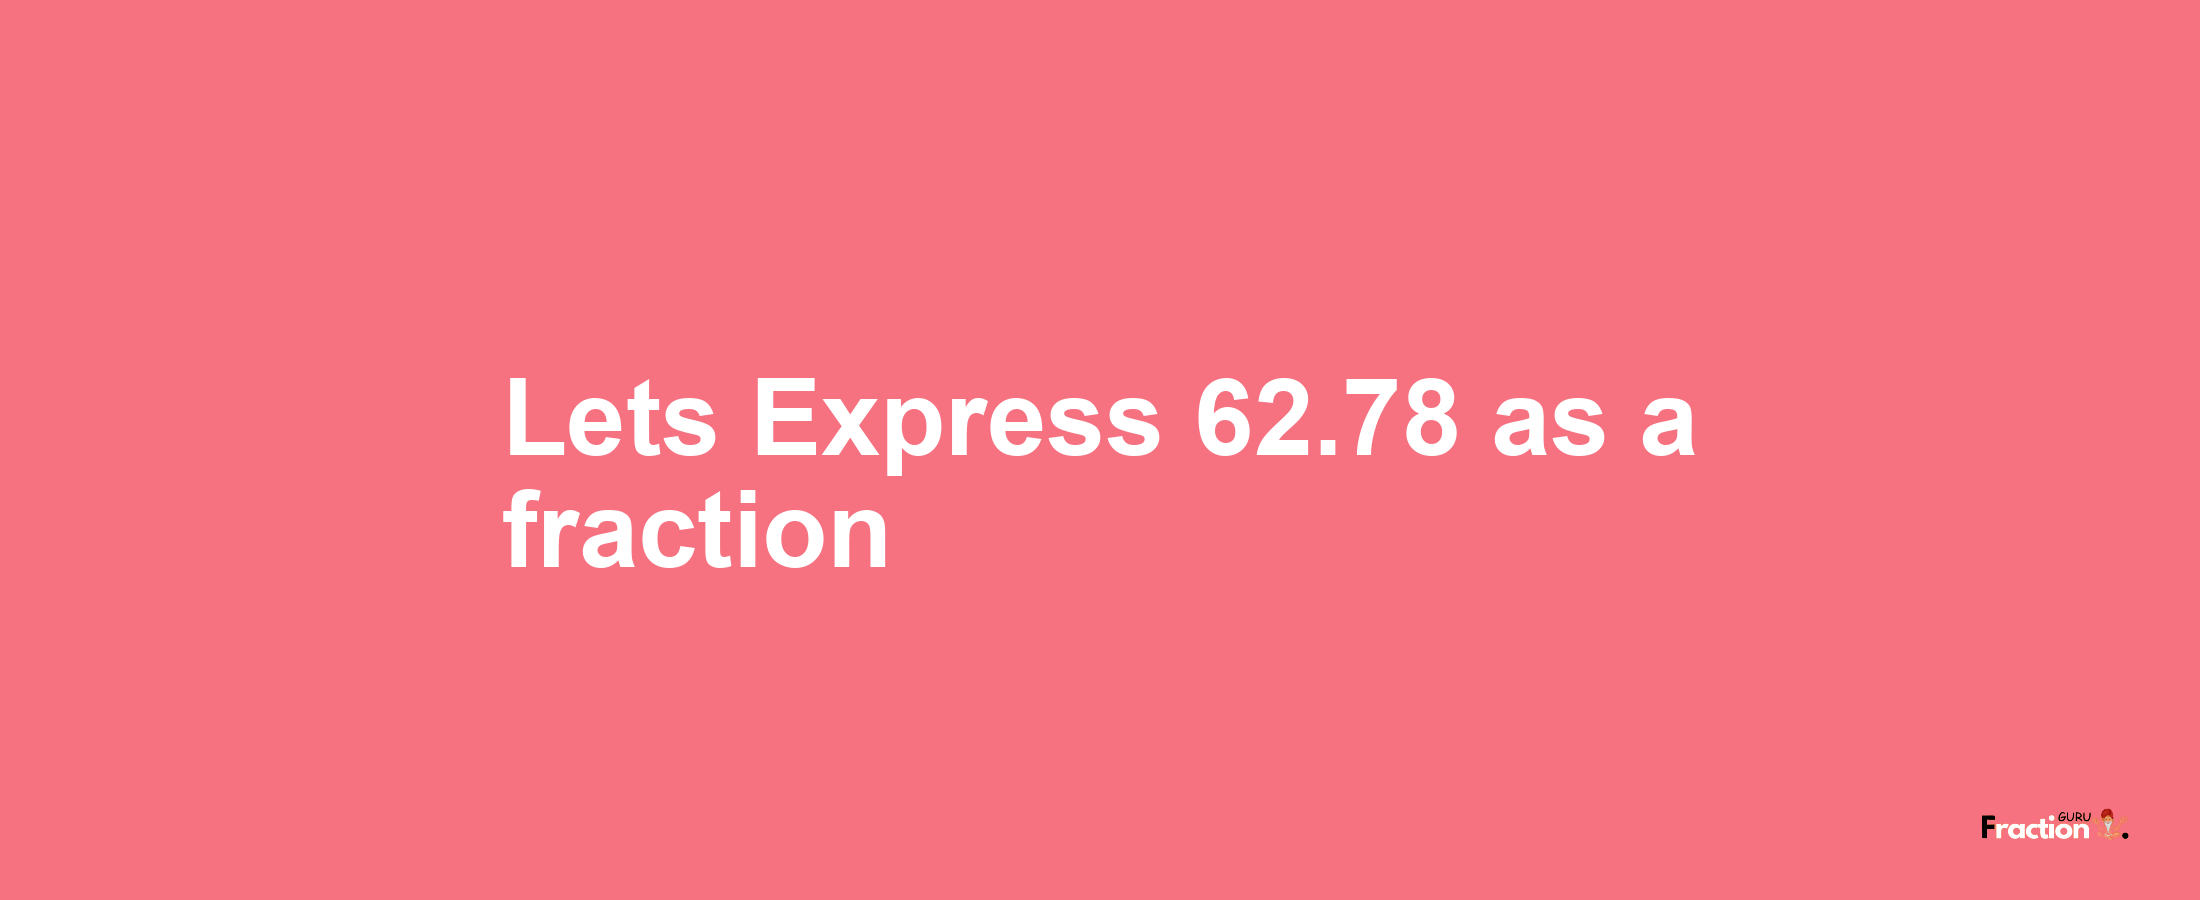 Lets Express 62.78 as afraction